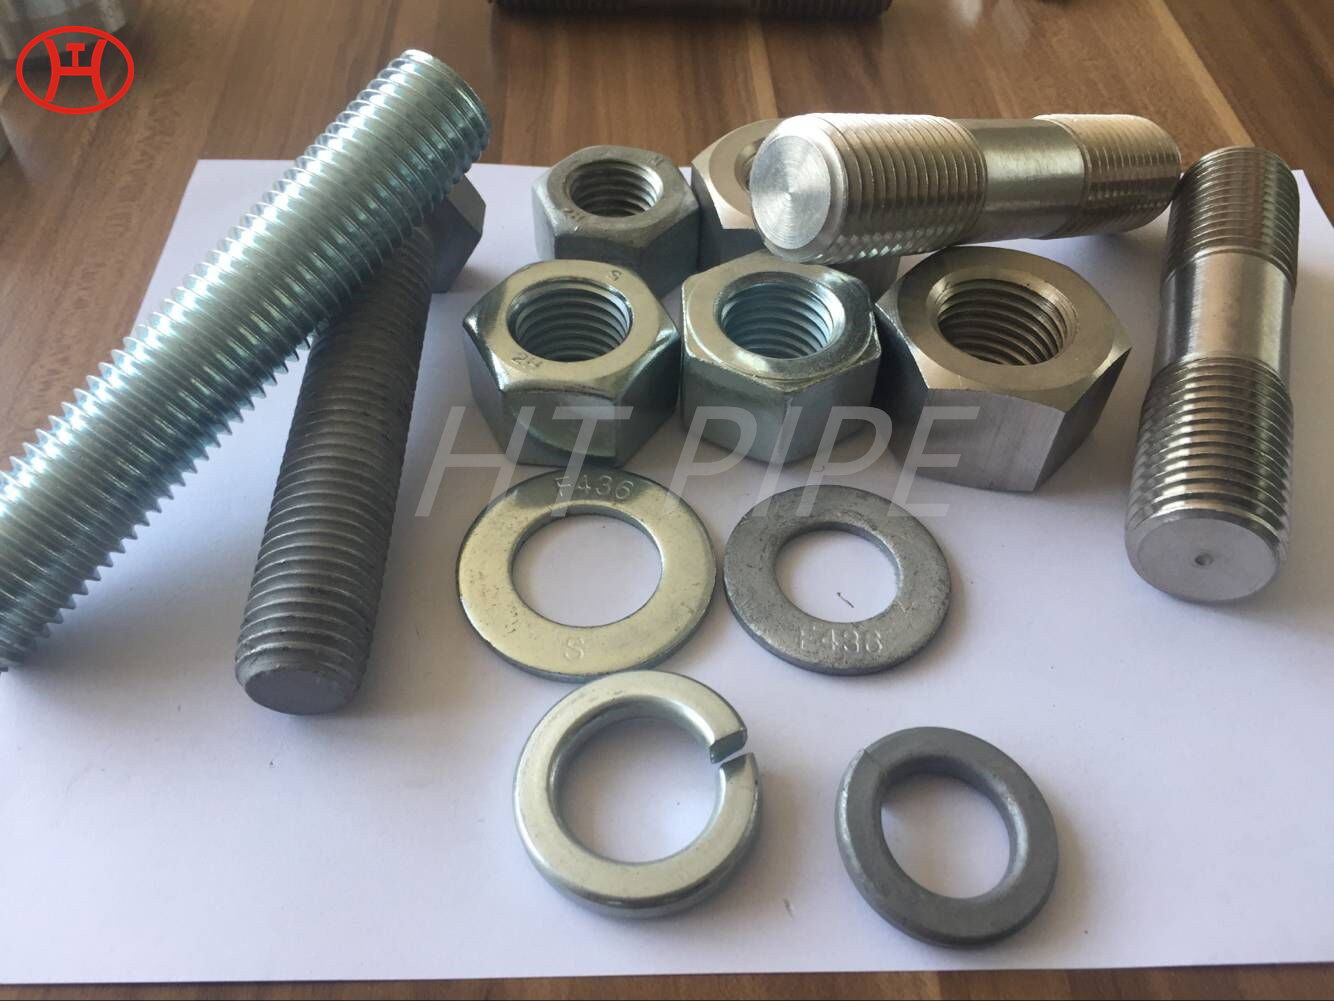 HT fasteners bolt nut washer screw nickel alloy Hastelloy Incoloy Inconel bolt